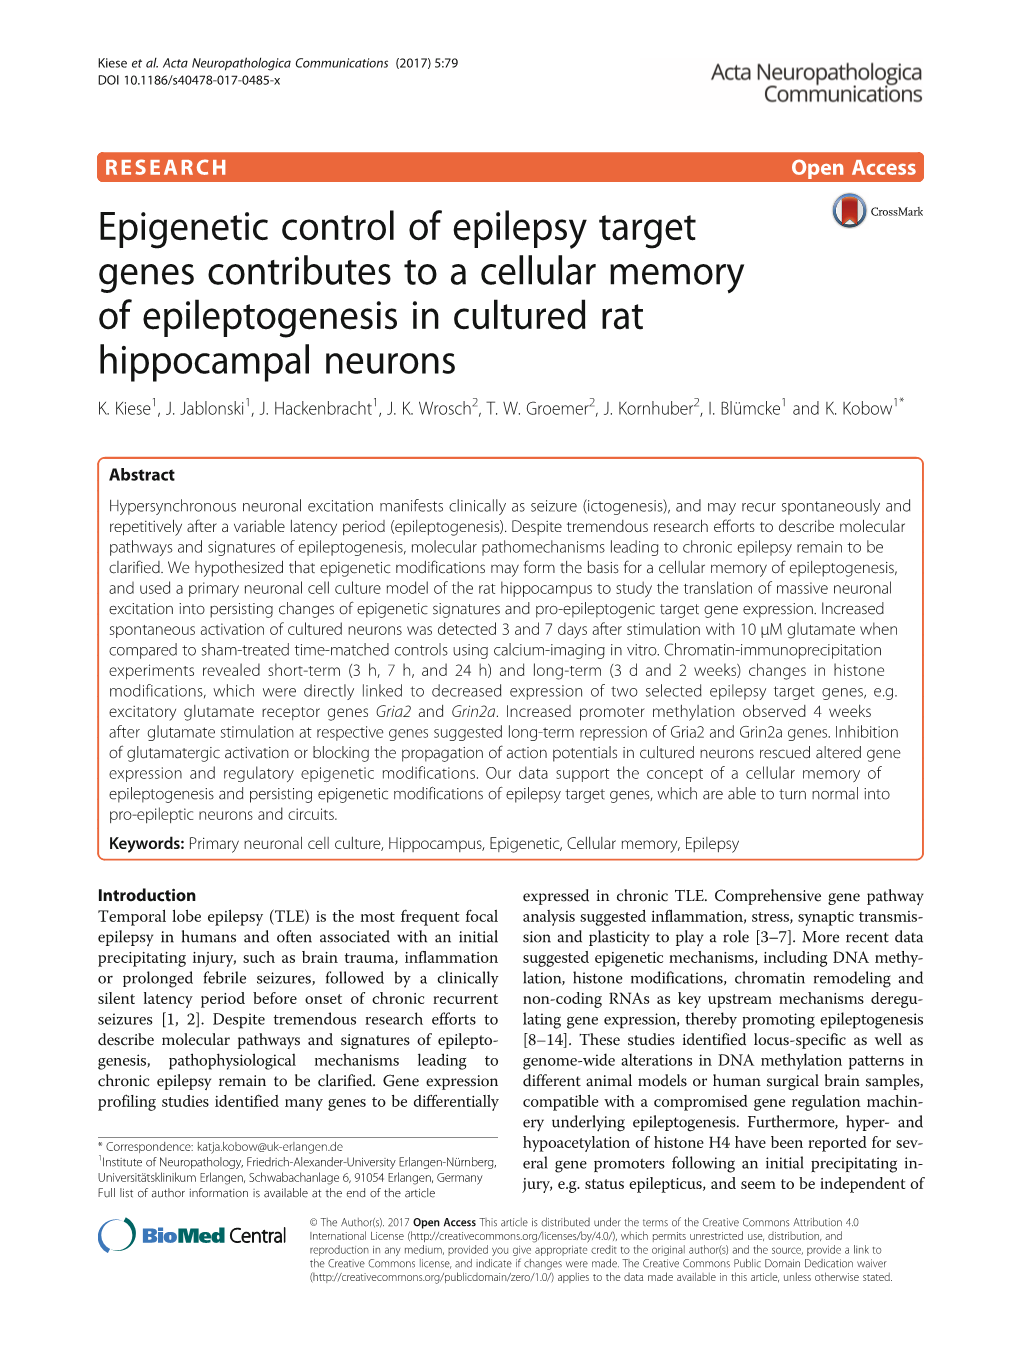 Epigenetic Control of Epilepsy Target Genes Contributes to a Cellular Memory of Epileptogenesis in Cultured Rat Hippocampal Neurons K